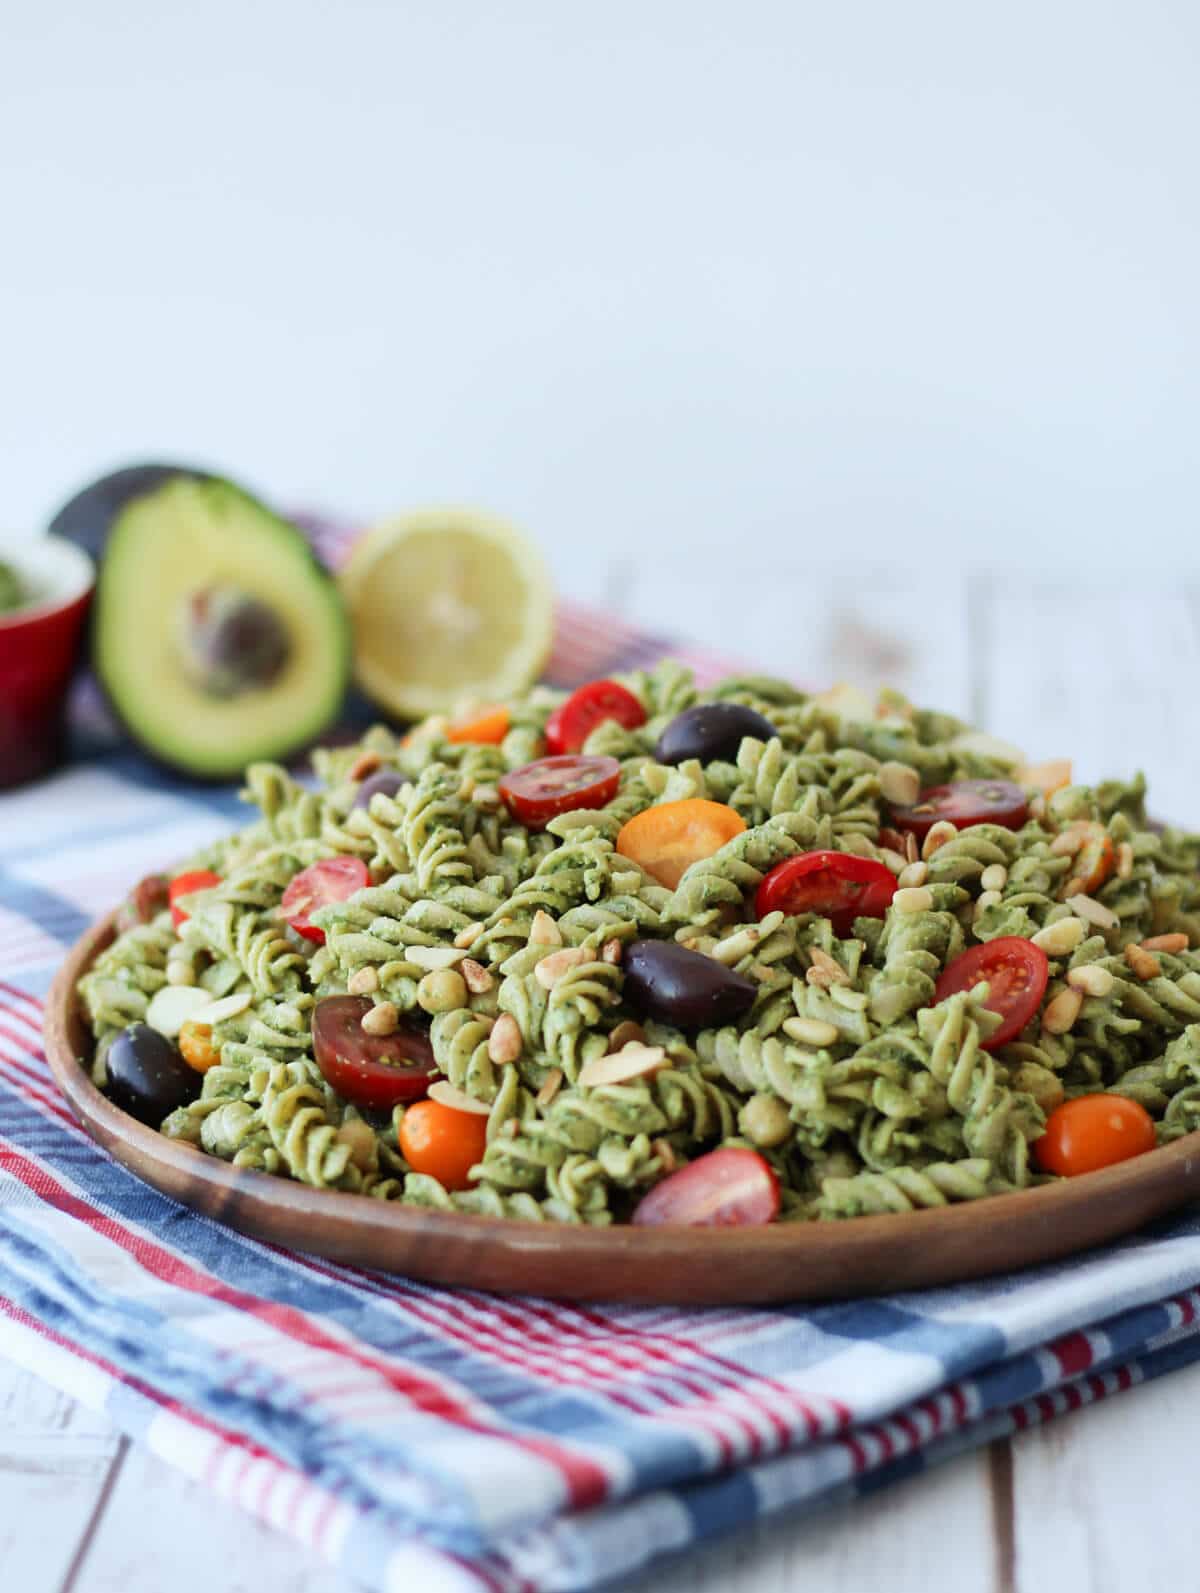 A plate of pasta salad coated in pesto.